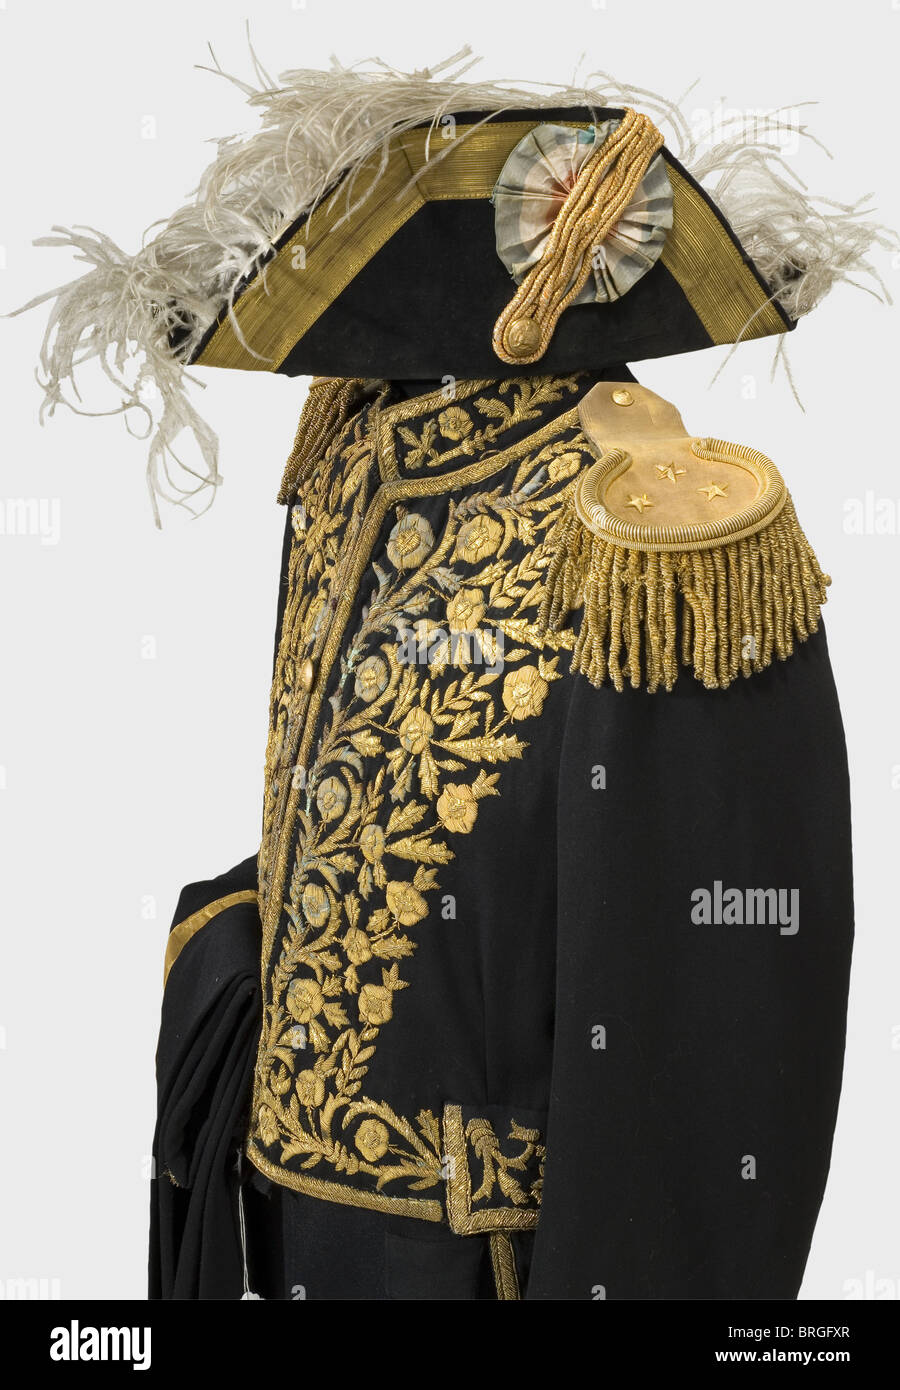 An Iranian diplomatic uniform, circa 1930 Cocked hat of black velvet with gold lace and loop, silk cockade. Tail coat of black cloth with golden metal embroidery of floral designs, golden epaulettes with olive-green wool backing. Matching trousers with broad golden leg stripes. Beautiful cloth, embroidery and epaulettes have traces of age and wear., historic, historical, 1930s, 20th century, object, objects, stills, clipping, clippings, cut out, cut-out, cut-outs, uniform, uniforms, outfit, outfits, textile, clothes, Additional-Rights-Clearences-Not Available Stock Photo